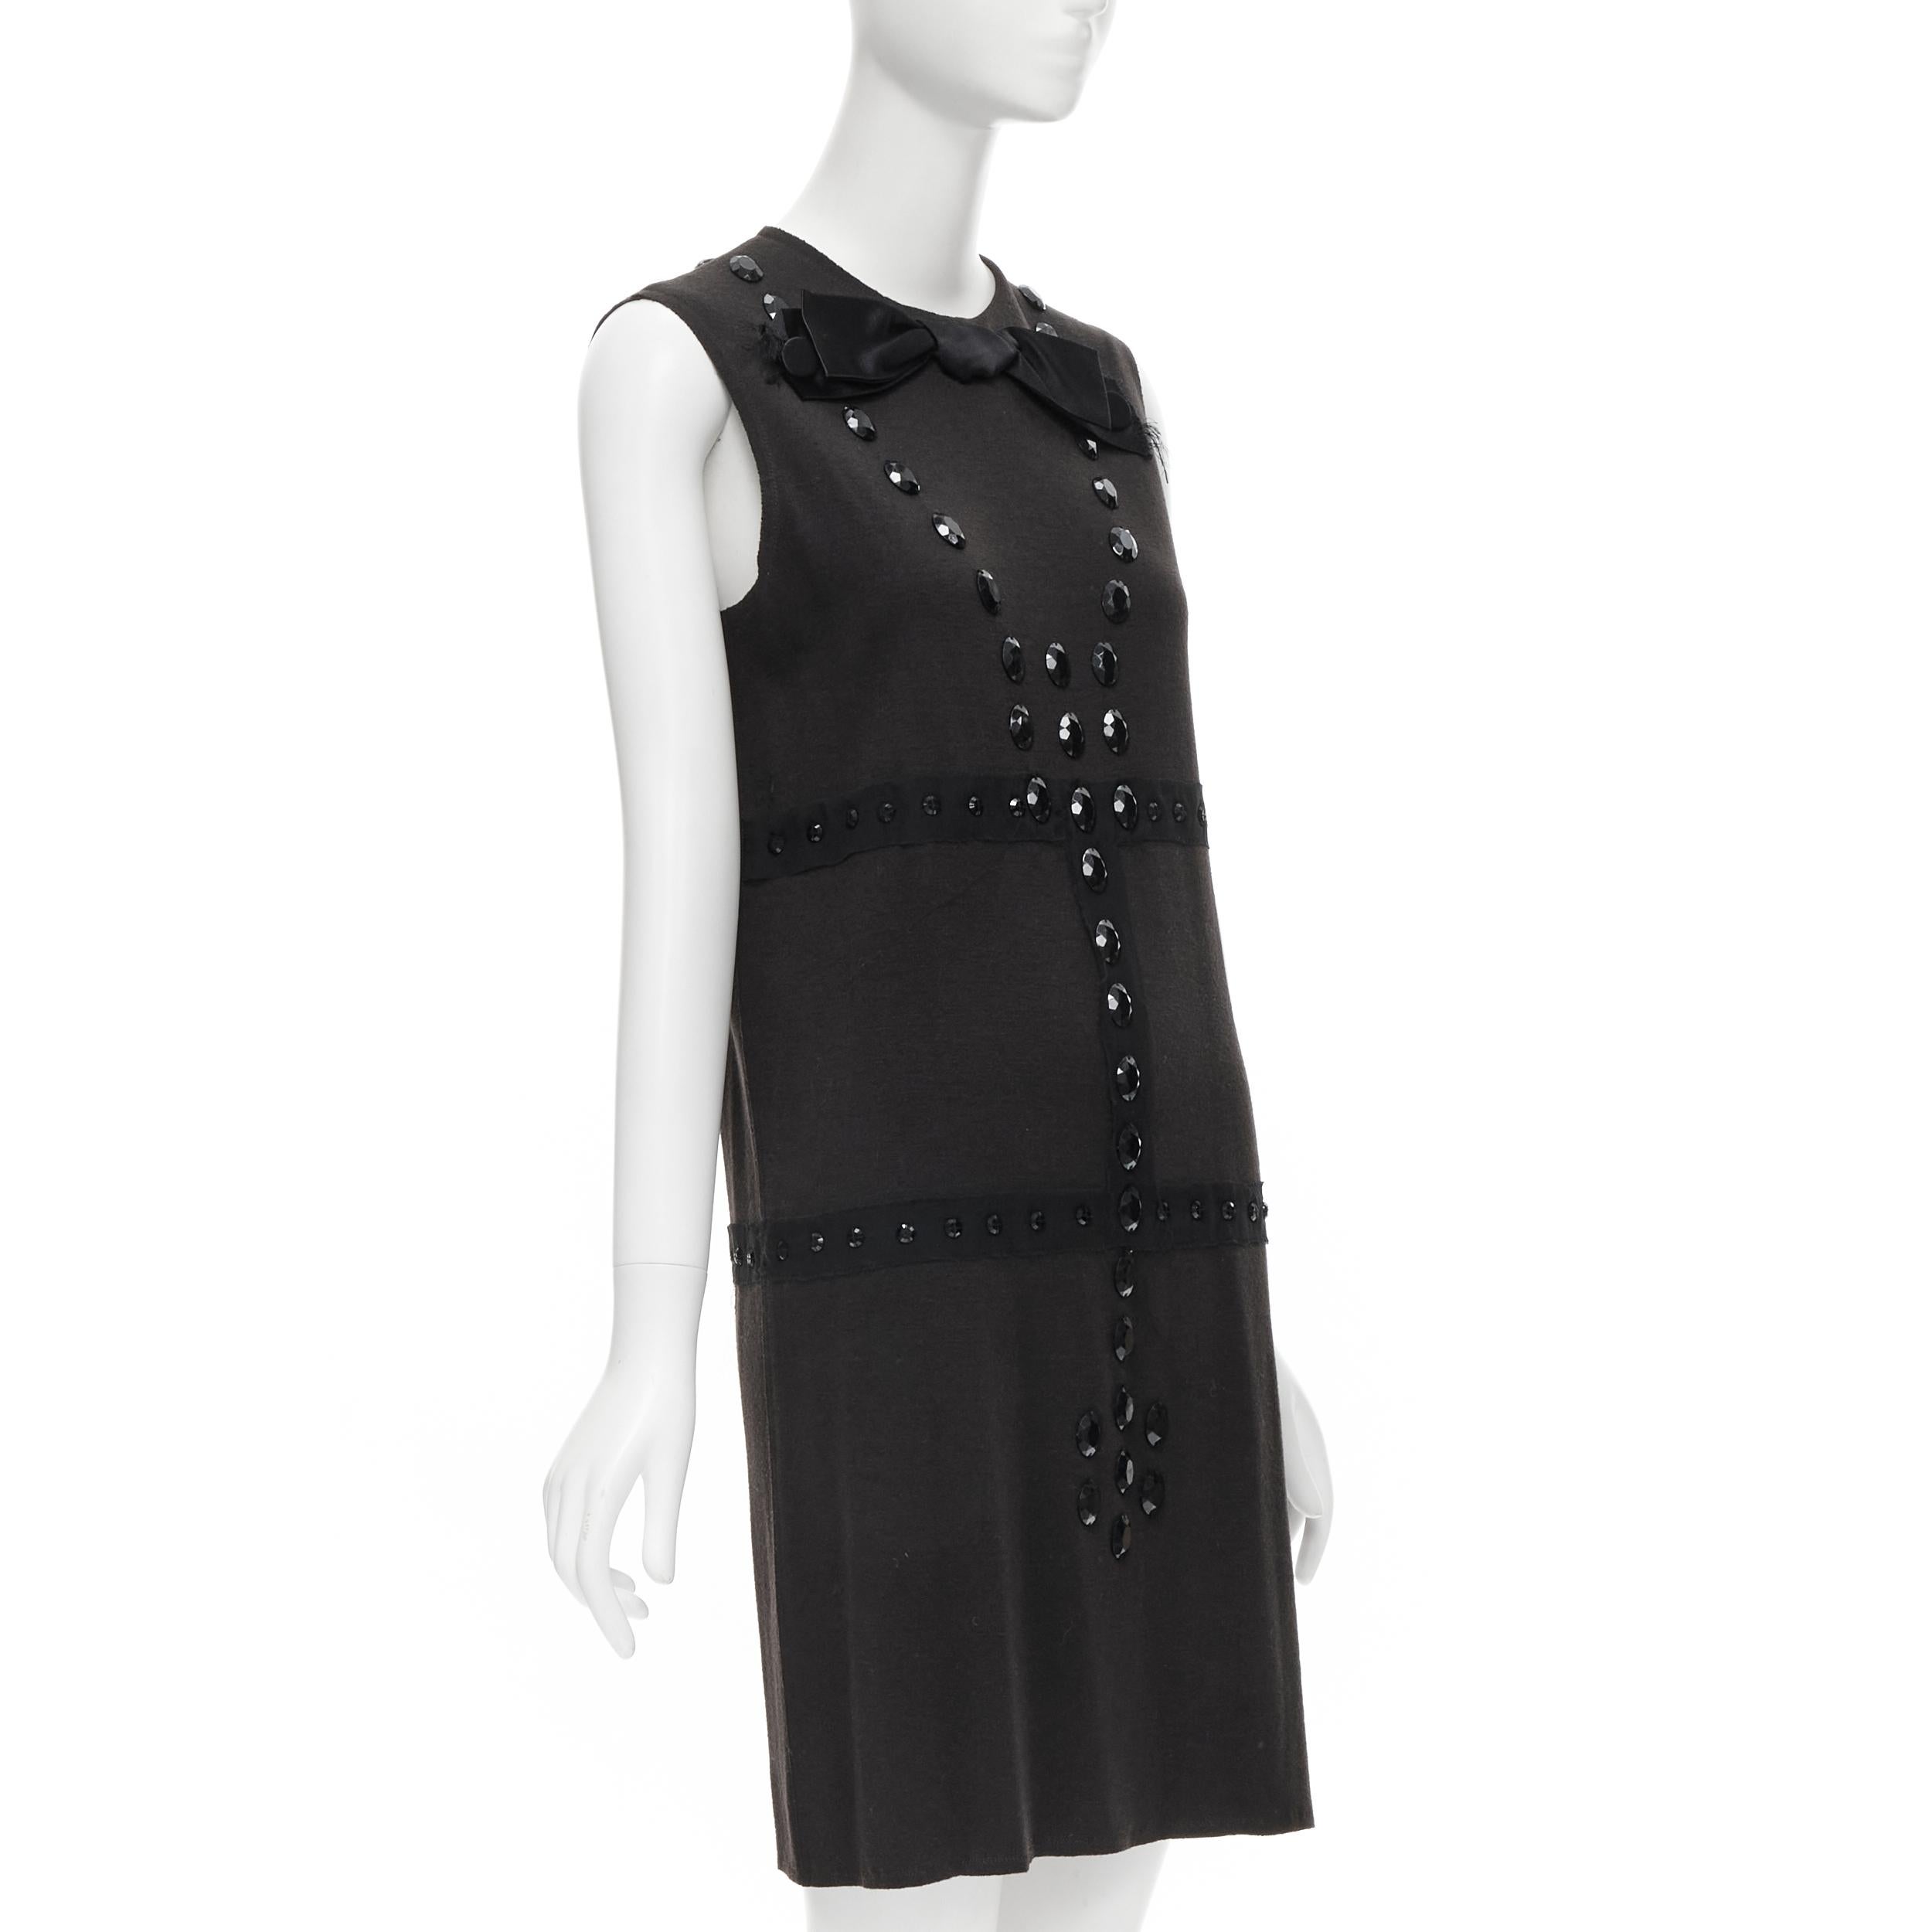 LANVIN 2004 Alber Elbaz brown wool black jewel embellished sheath dress FR38 S In Excellent Condition For Sale In Hong Kong, NT